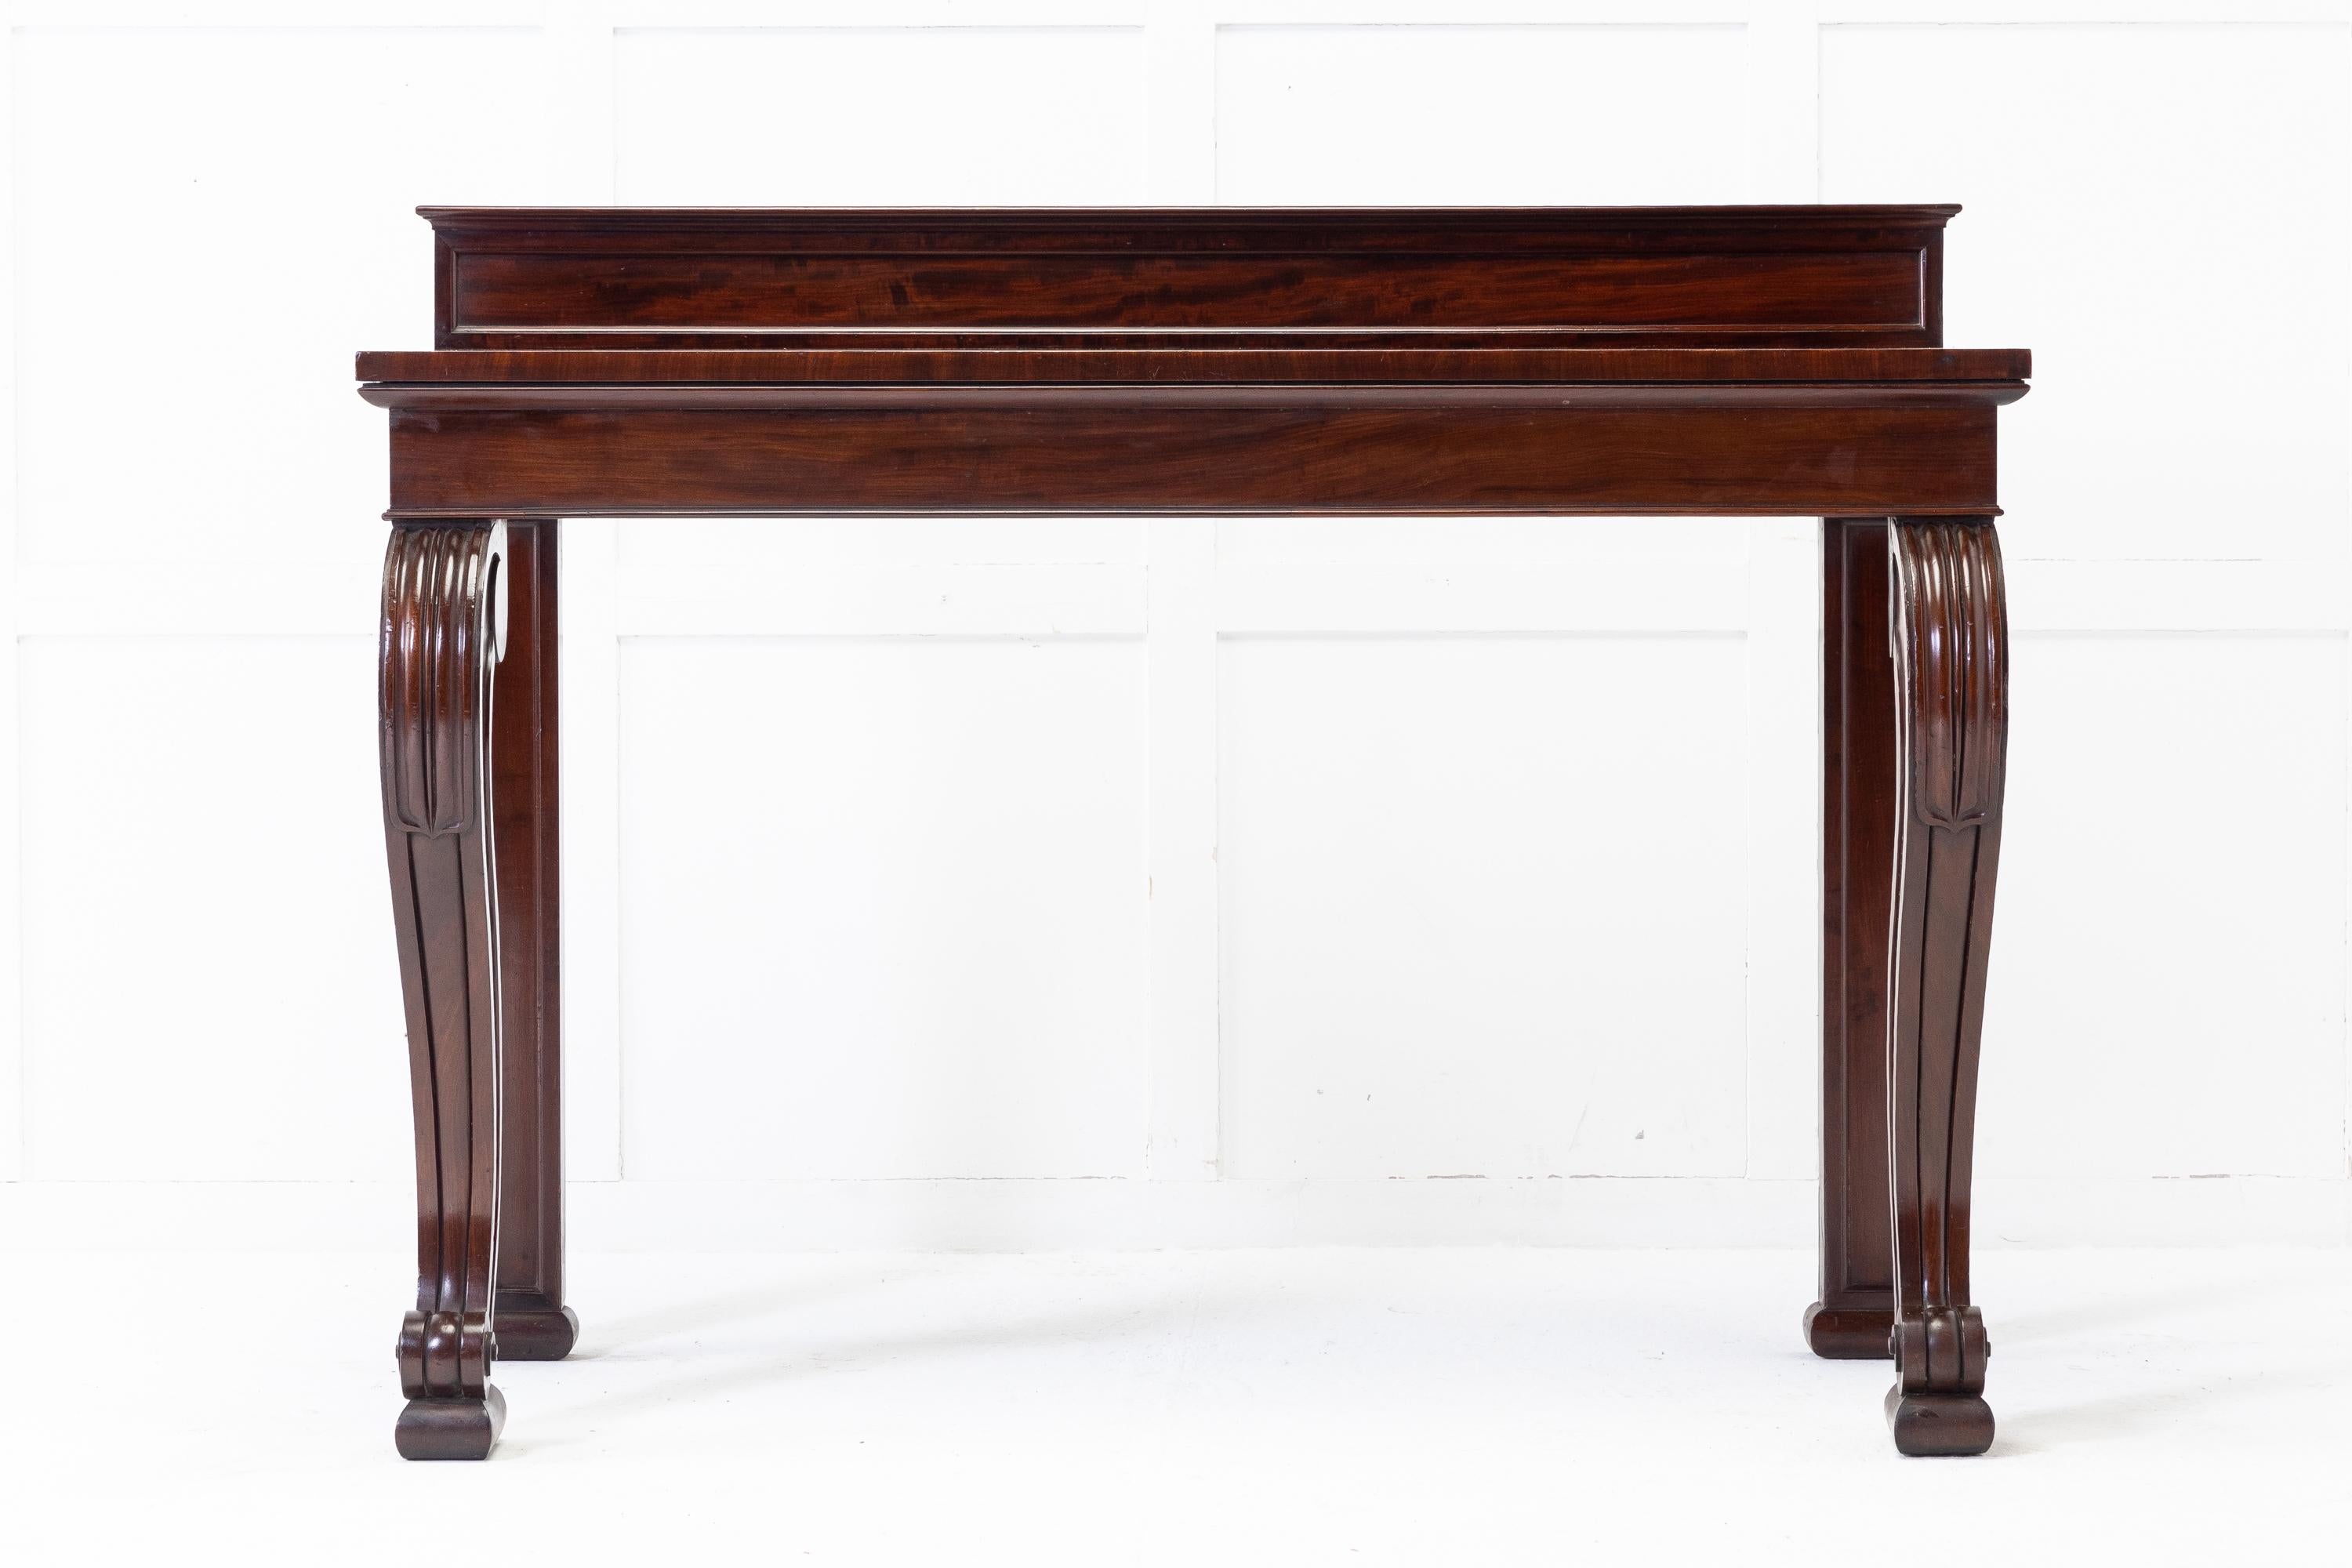 Early 19th century English Regency mahogany console table with rectangular top and small, shallow panelled up-Stand at the back. Supported by exaggerated scrolled front legs and panelled back legs with squashed feet.

A wonderfully shaped and